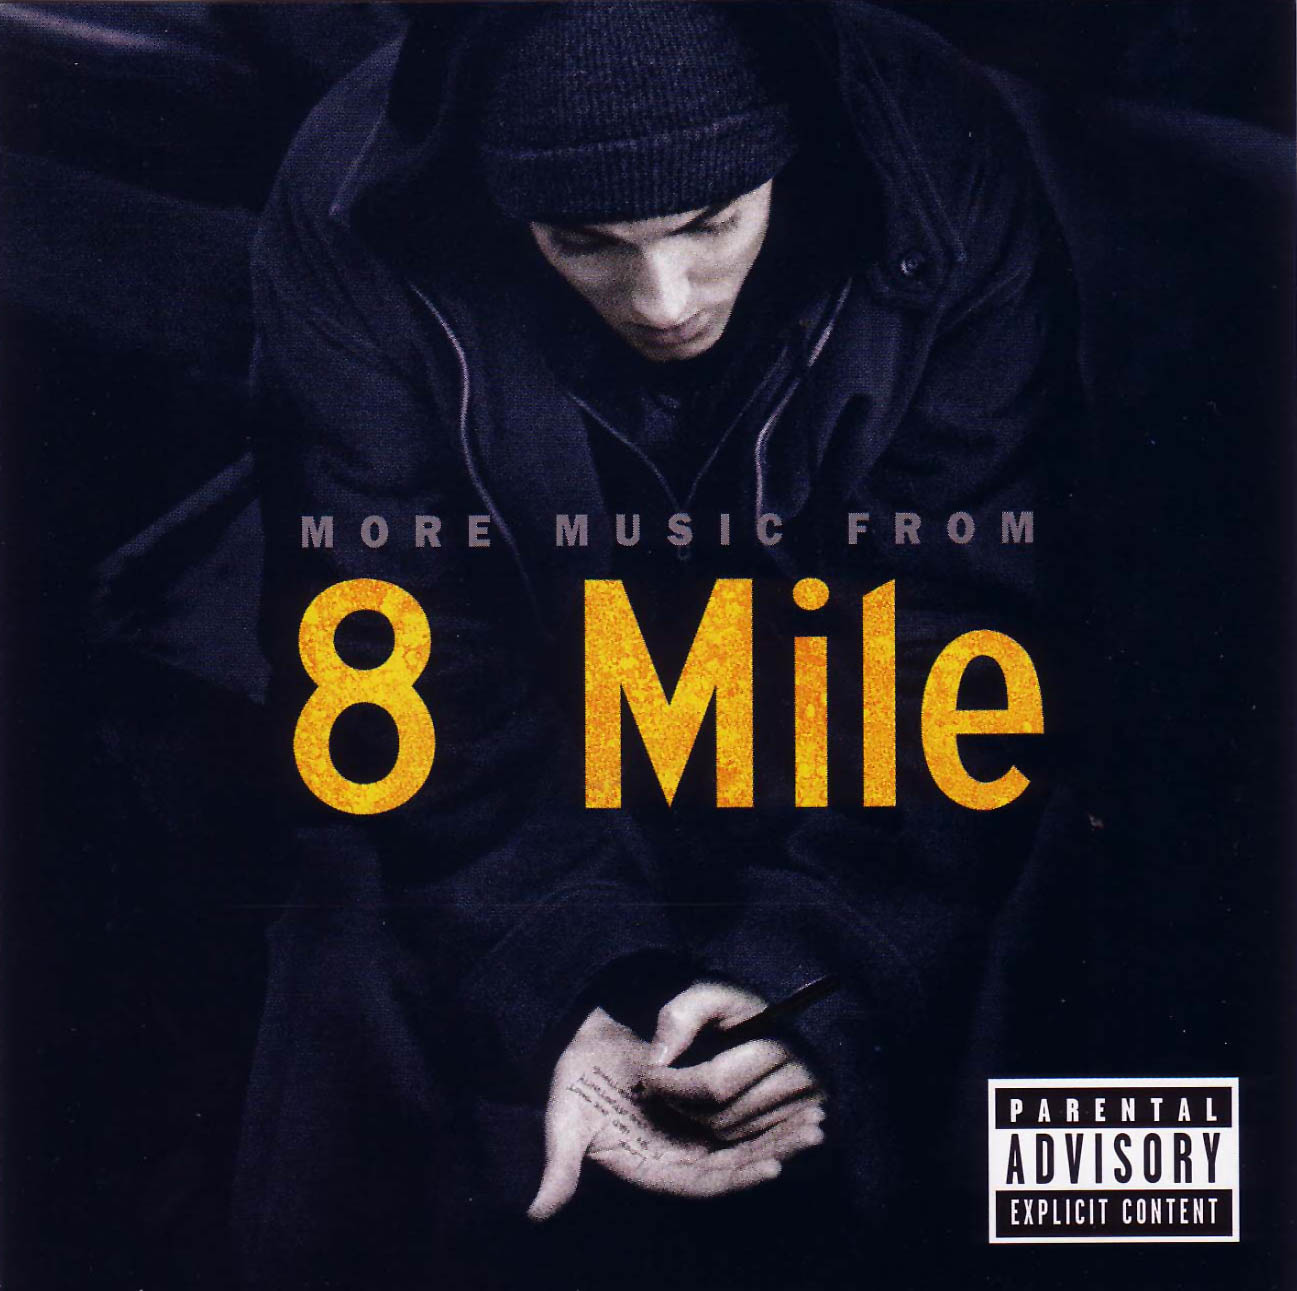 Cartula Frontal de Bso 8 Millas (More Music From 8 Mile)